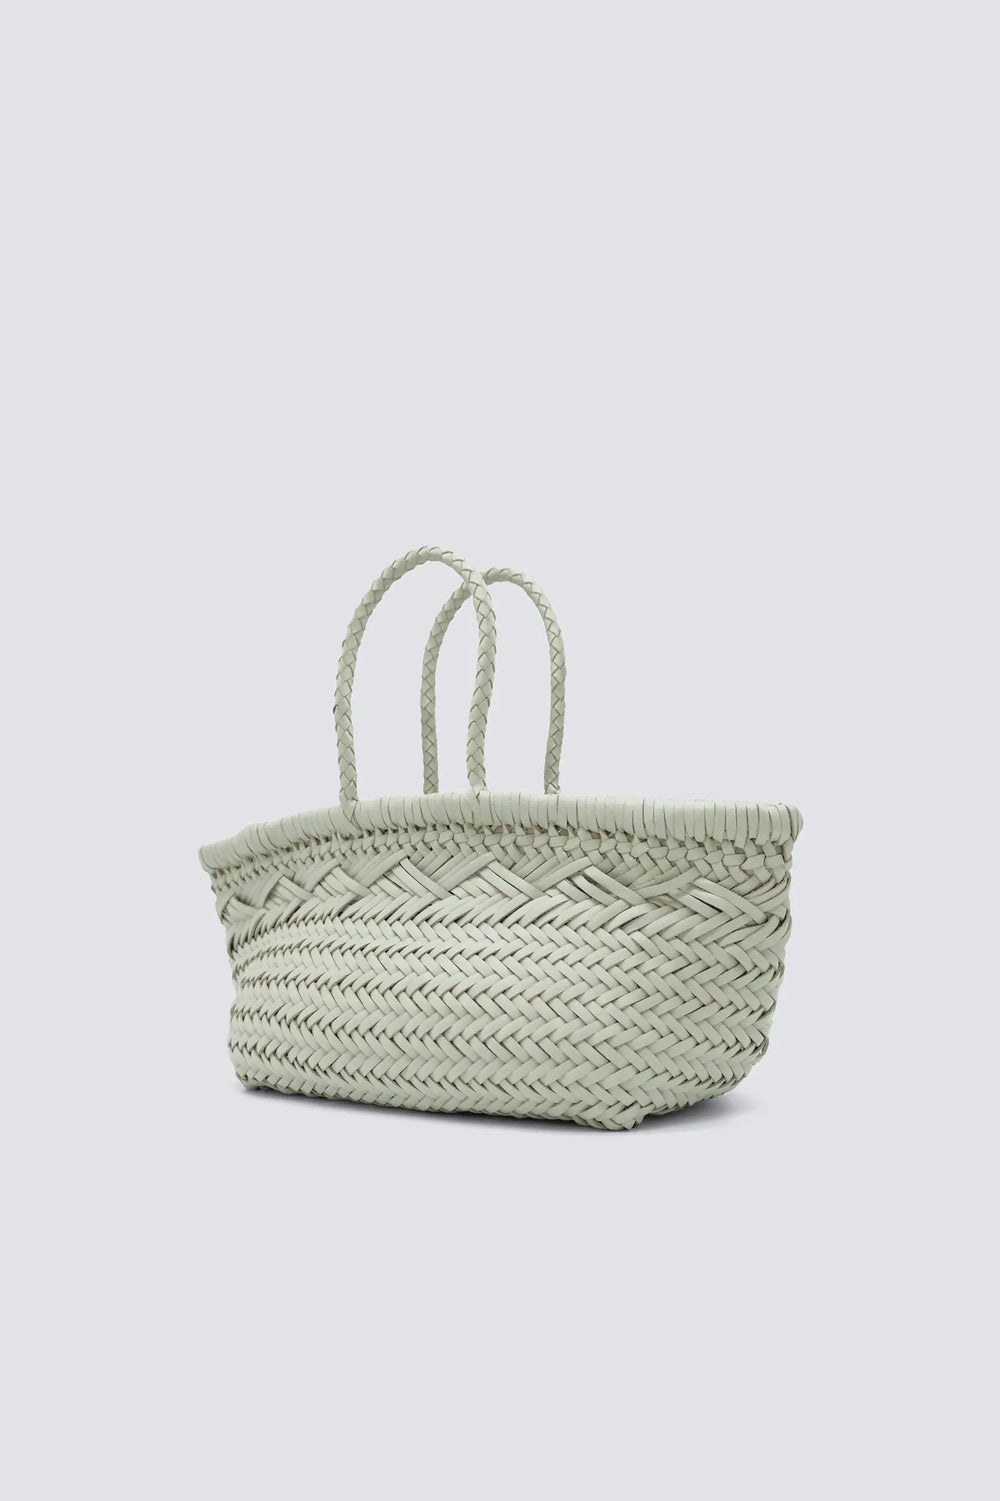 Dragon Diffusion - Woven Leather Bag Handmade - Triple Jump Small 6 Lines Pearl